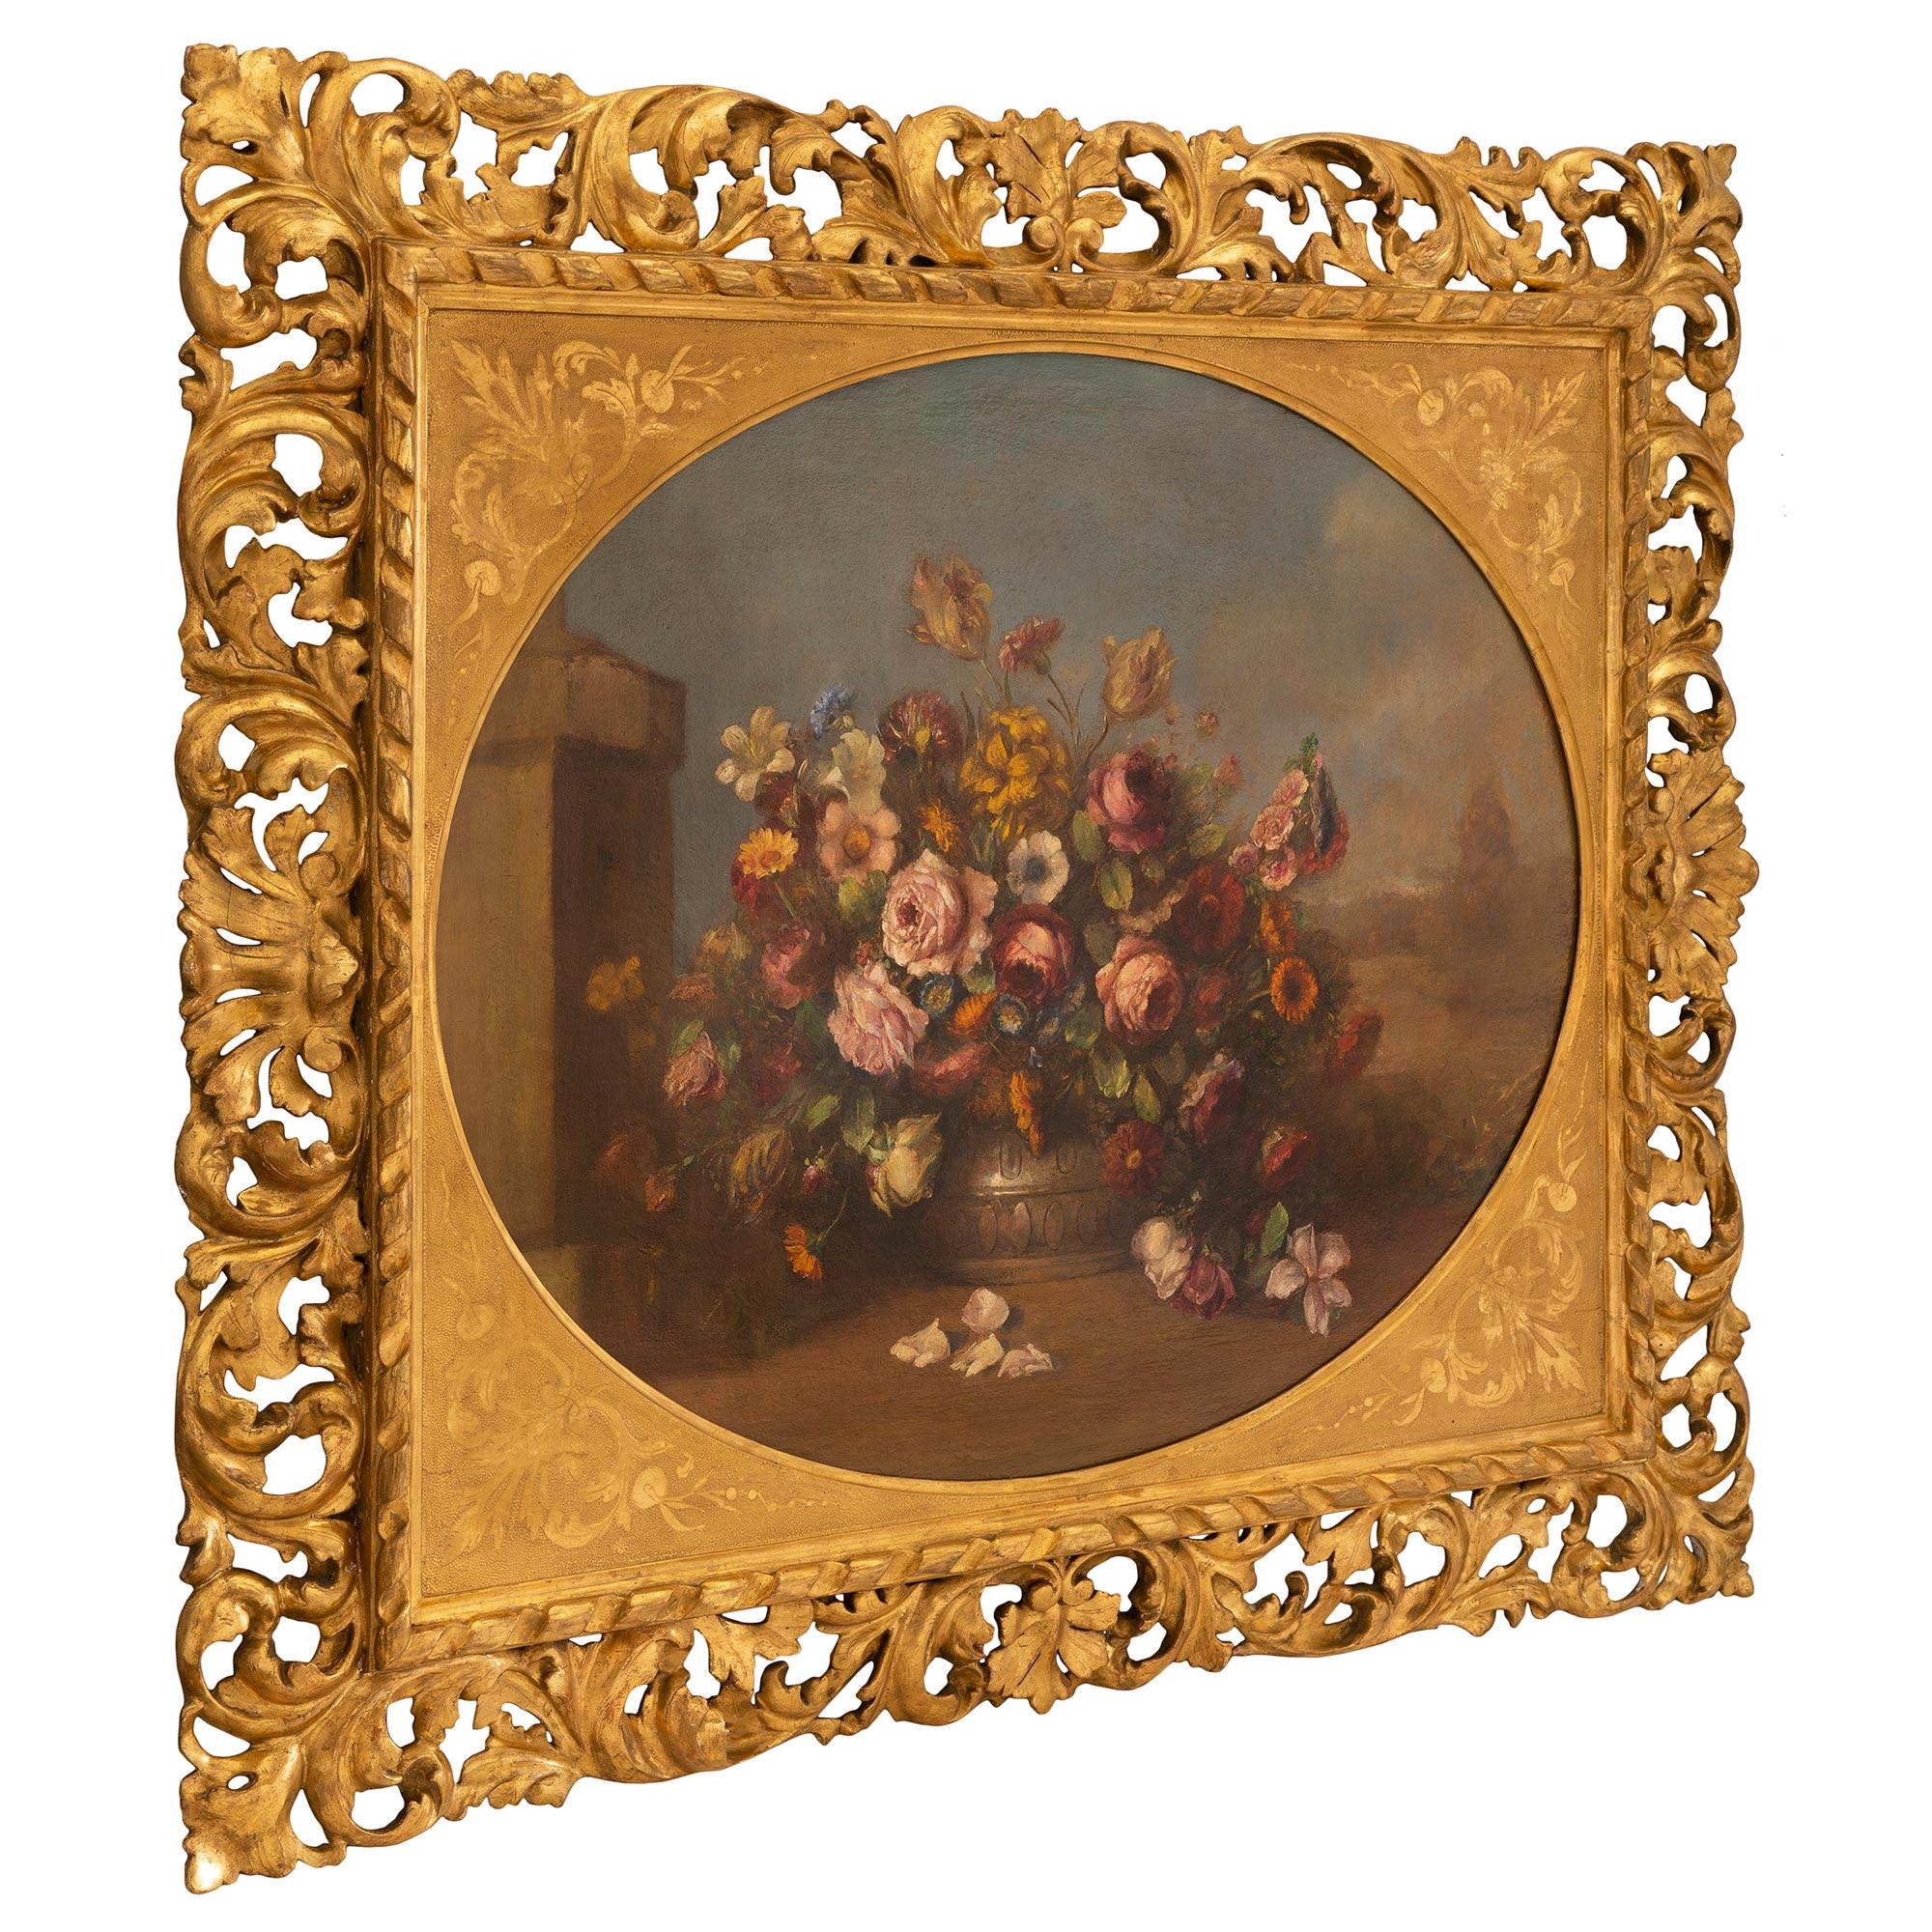 An outstanding Italian 19th century oil on canvas still life painting. The highly detailed painting depicts a vibrant and charming bouquet of flowers in a vase, against blue sky. The painting is framed within a pierced giltwood frame with richly